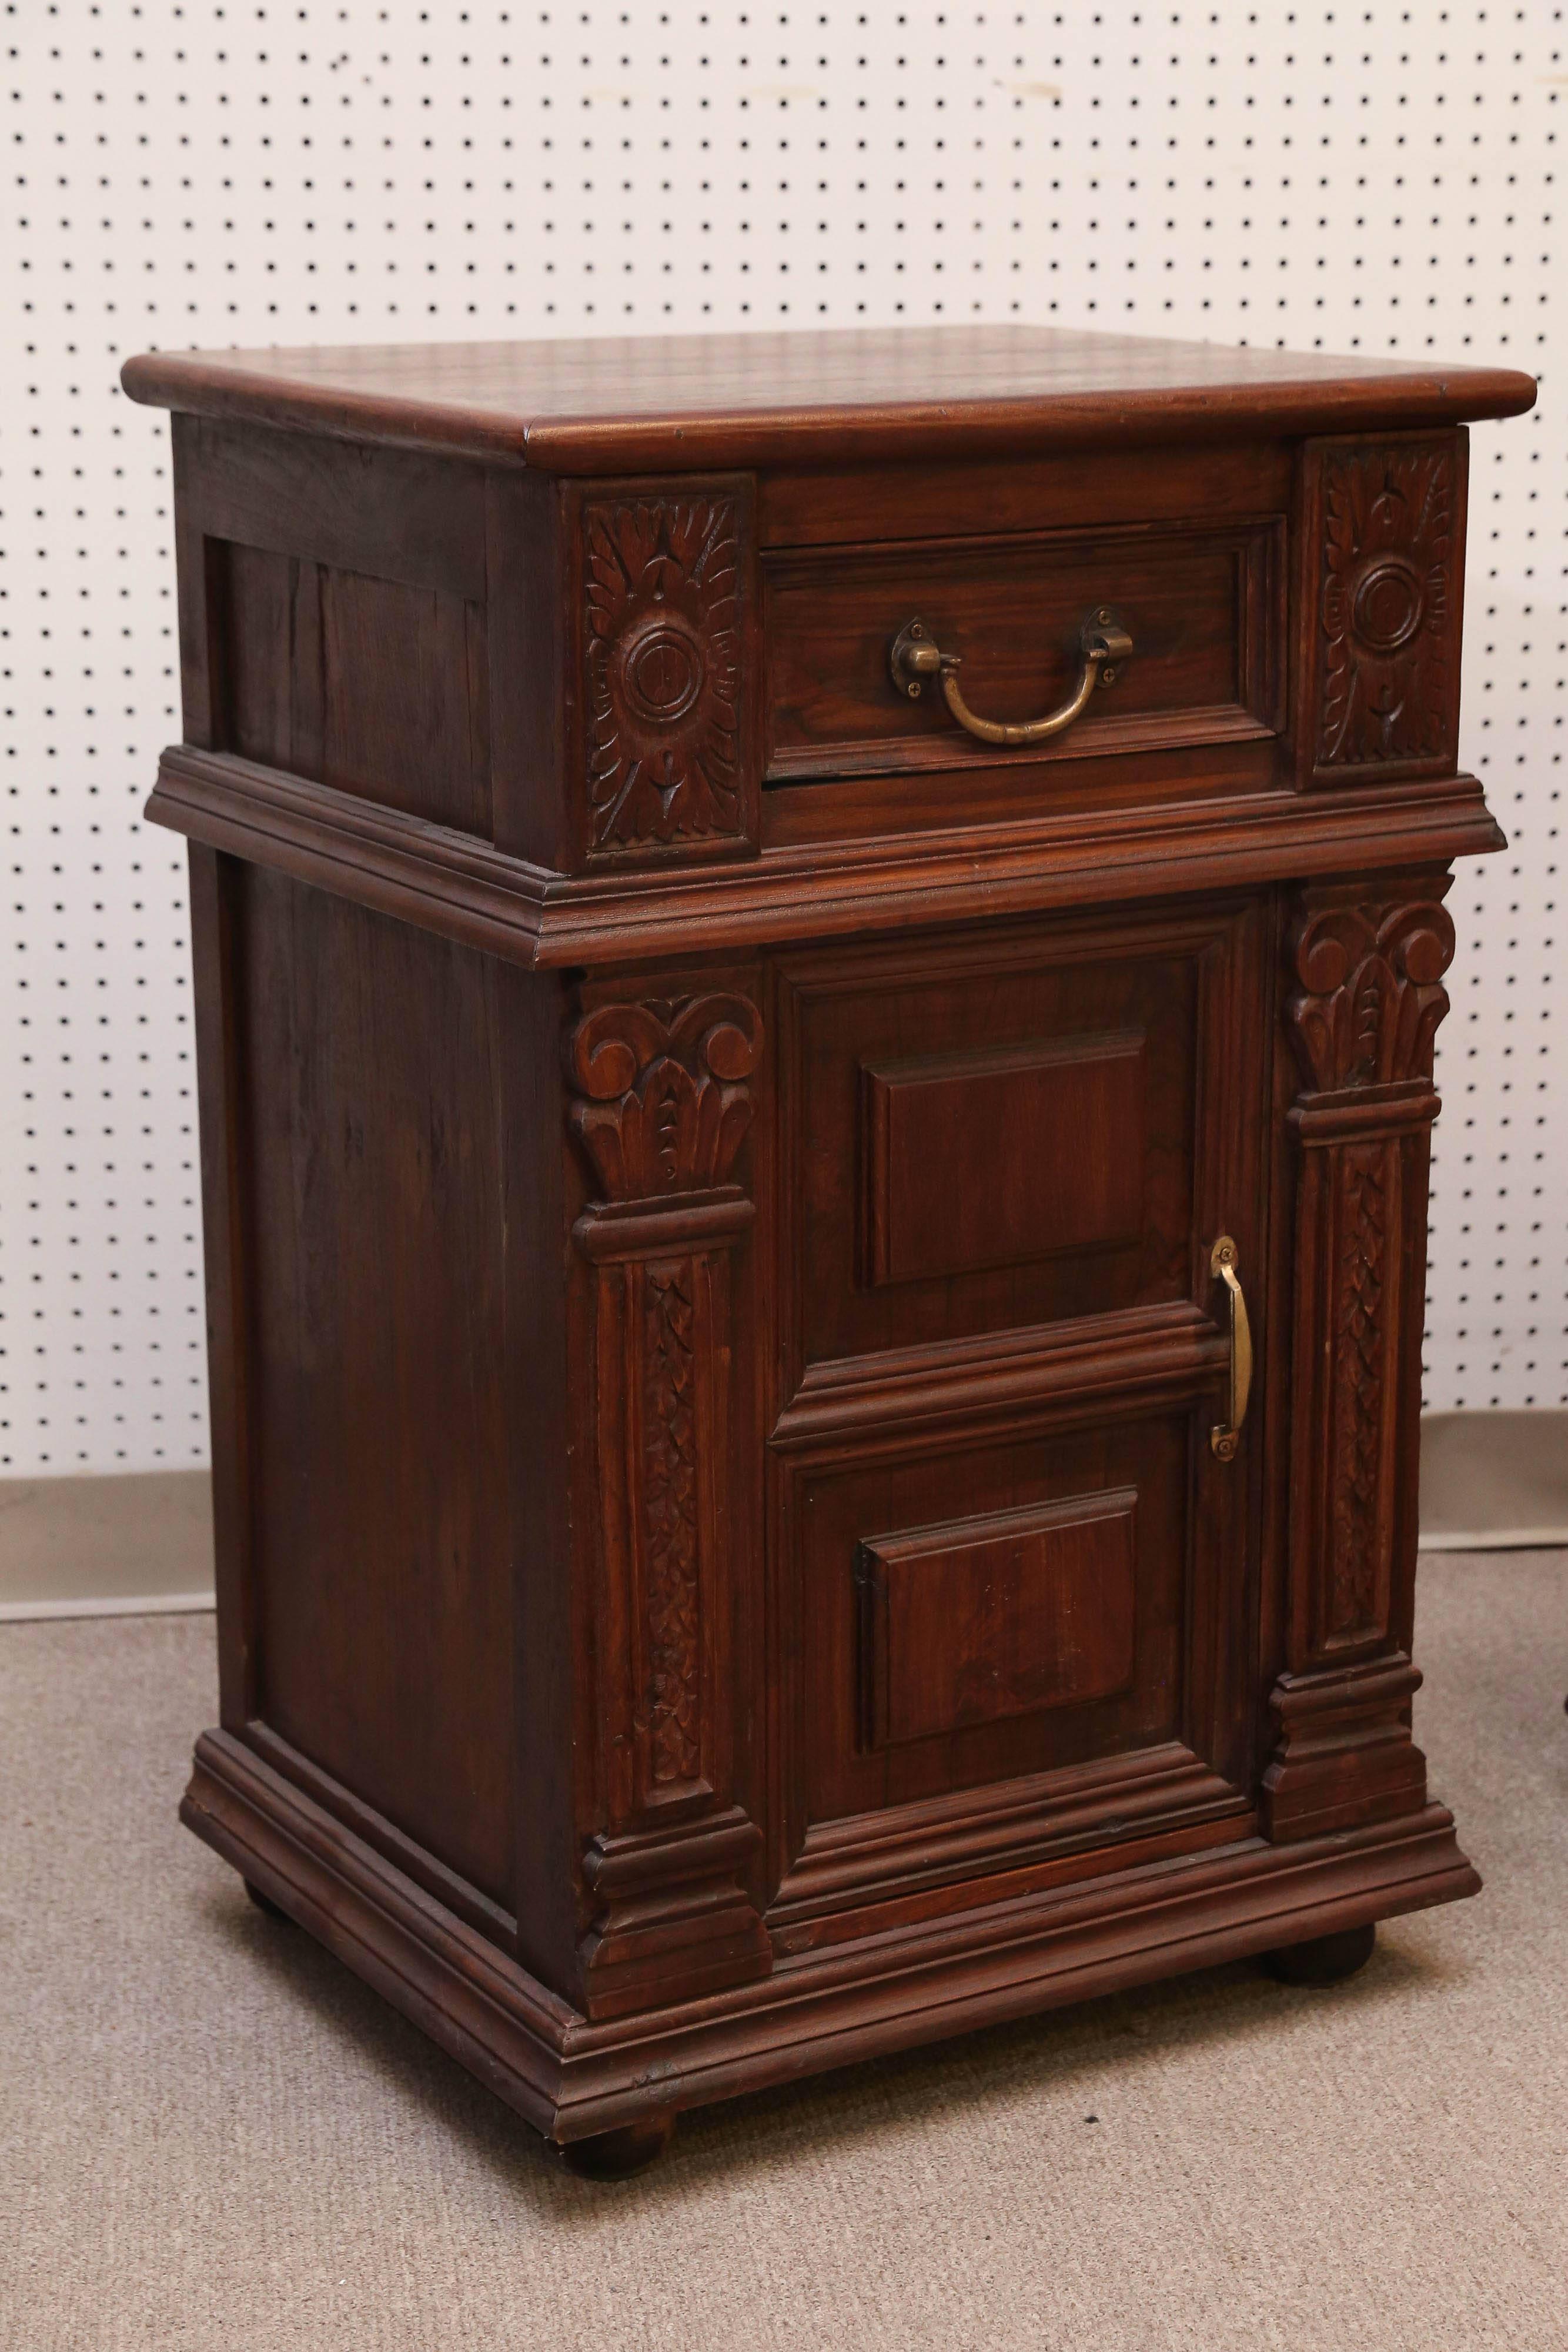 Early 20th century solid teak wood night stands from a British Colonial home. These are nicely carved with pillar design in front and ball feet. It has an upper drawer and a bottom shelf. Heavily made to last several generations.
Such high quality